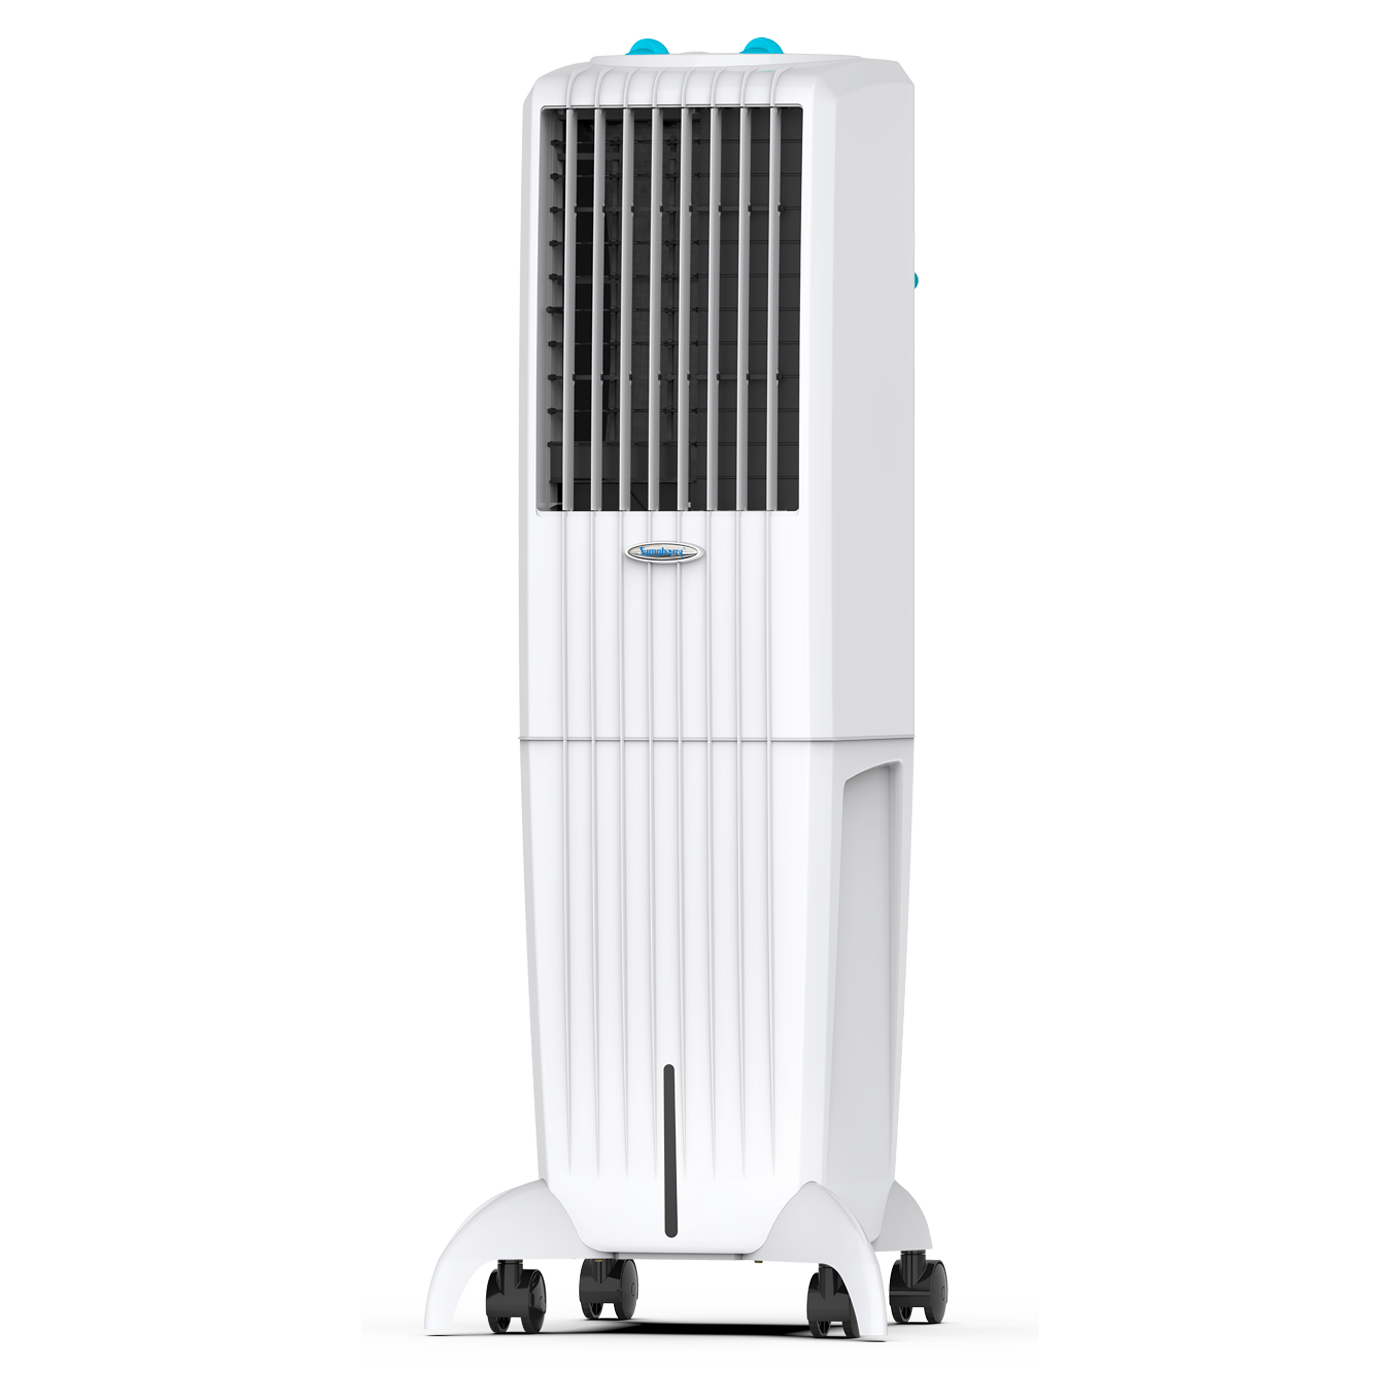 Diet 35T Tower Room Air Cooler 35-litres